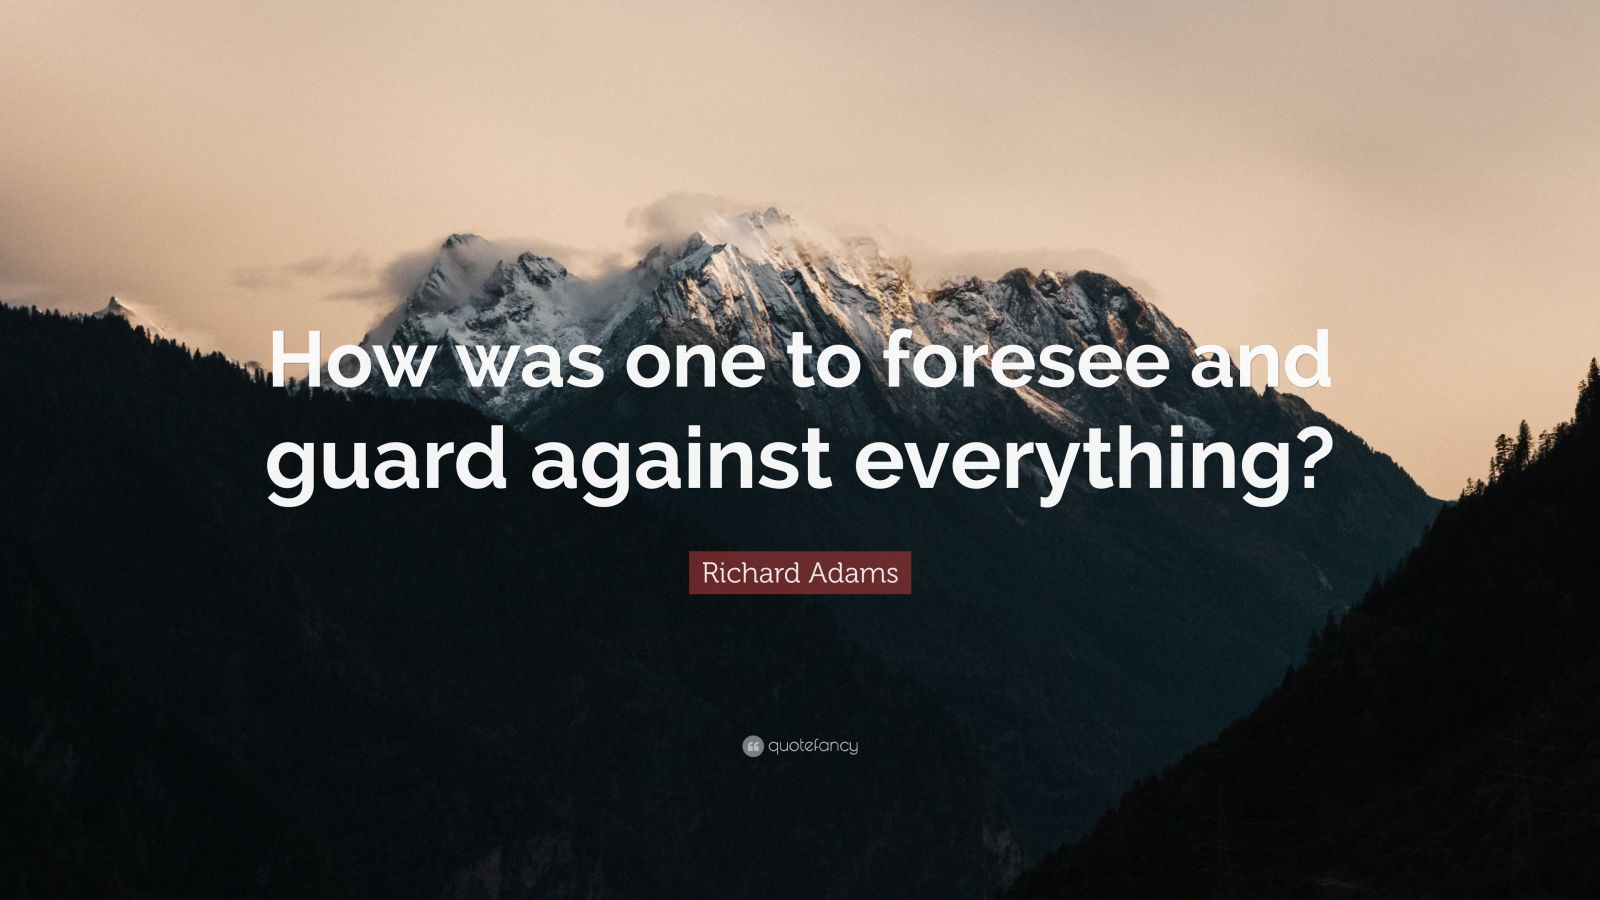 Richard Adams Quote “how Was One To Foresee And Guard Against Everything” 